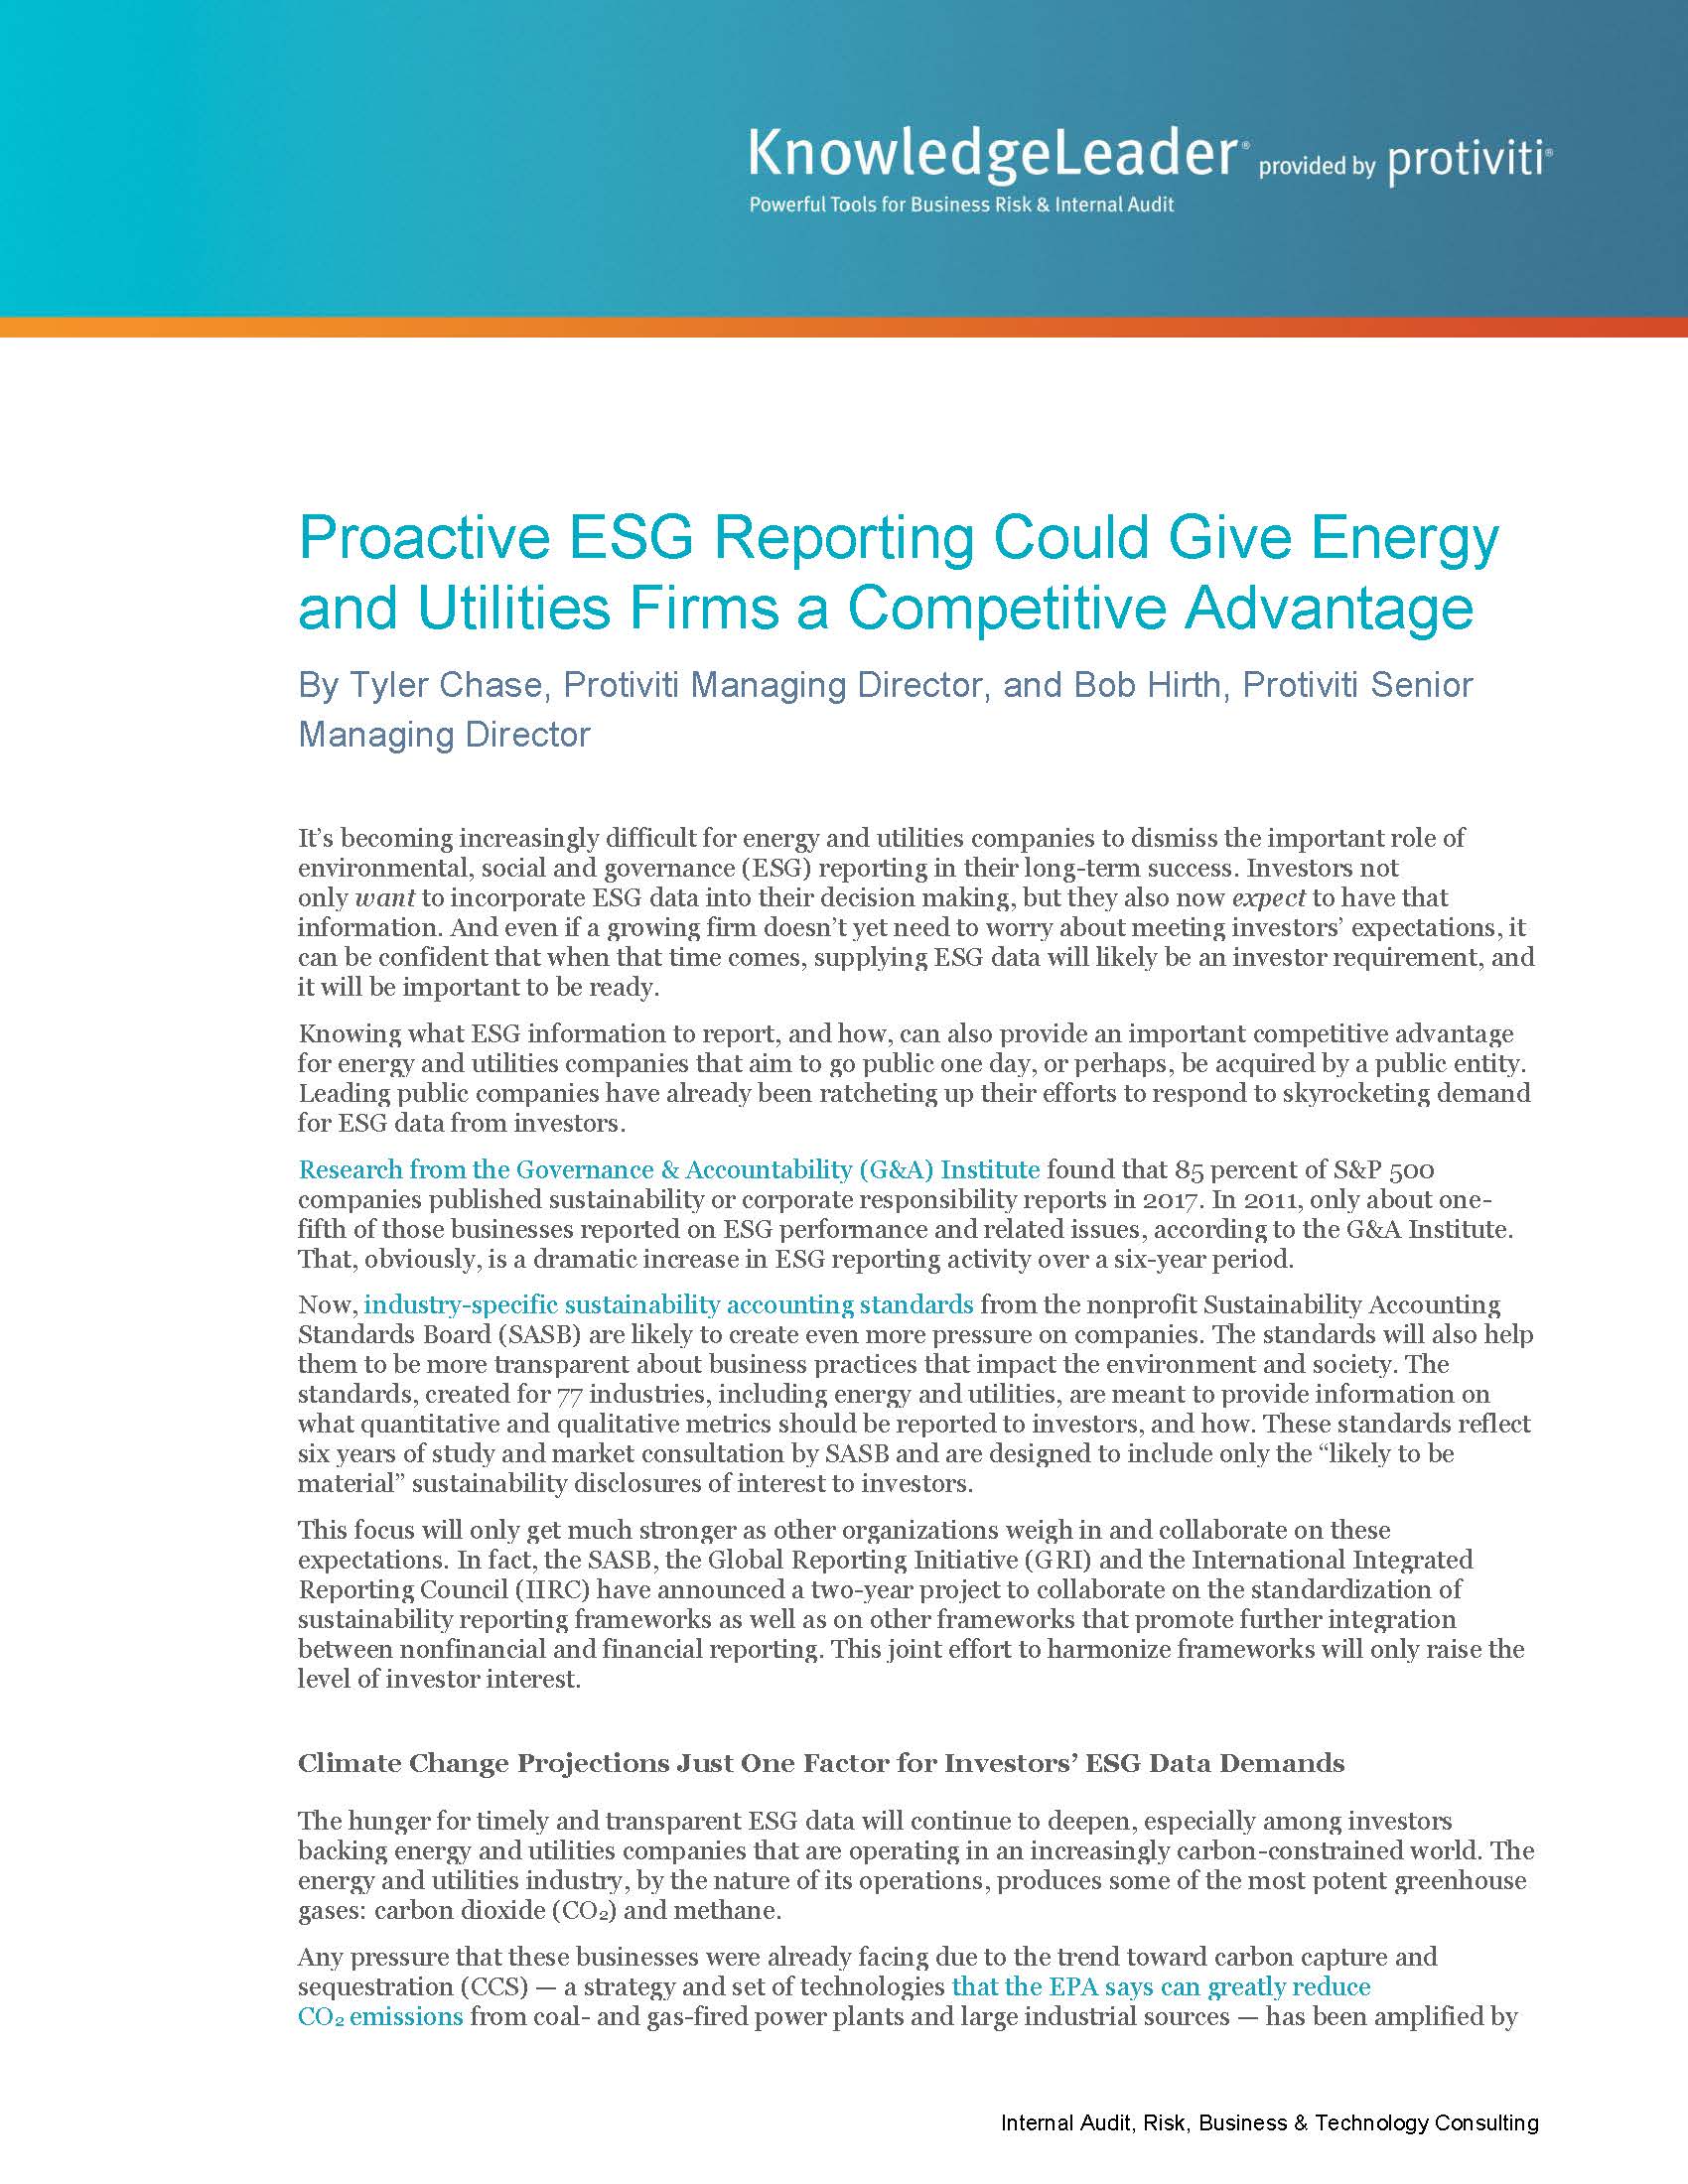 Screenshot of the first page of Proactive ESG Reporting Could Give Energy and Utilities Firms a Competitive Advantage